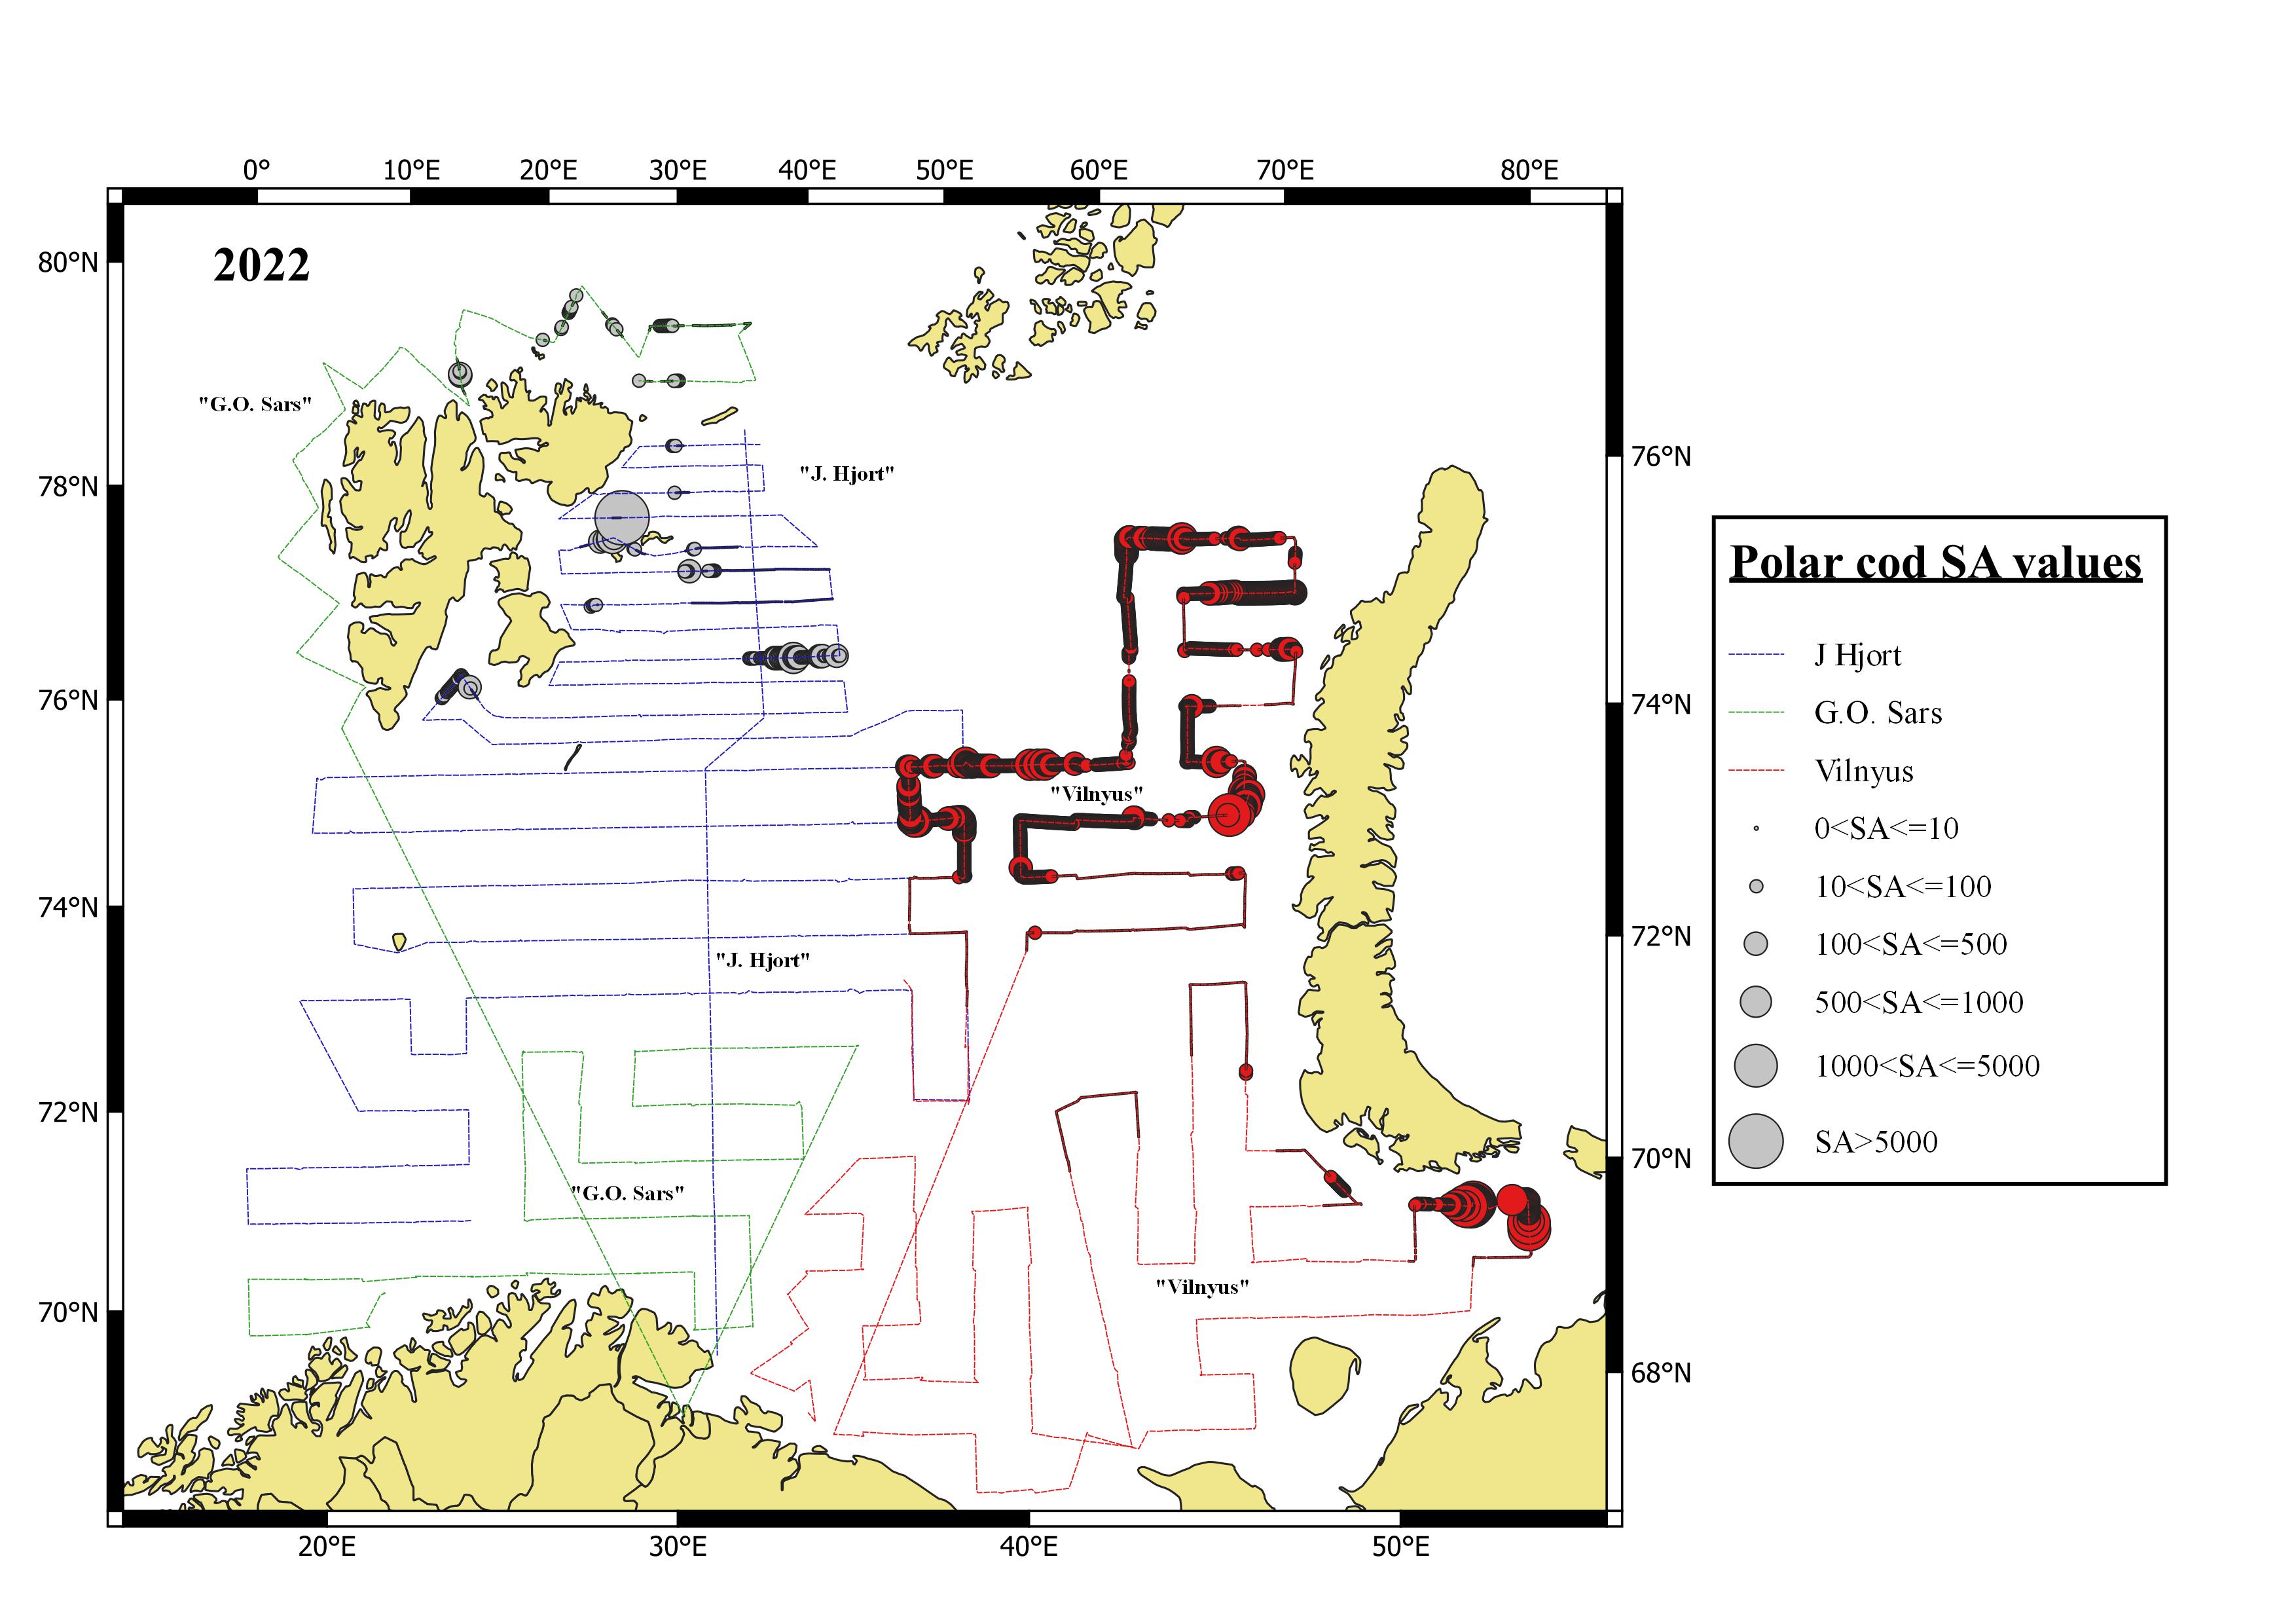 Ch 7.2.1.1 Geographical distribution of polar cod 2022